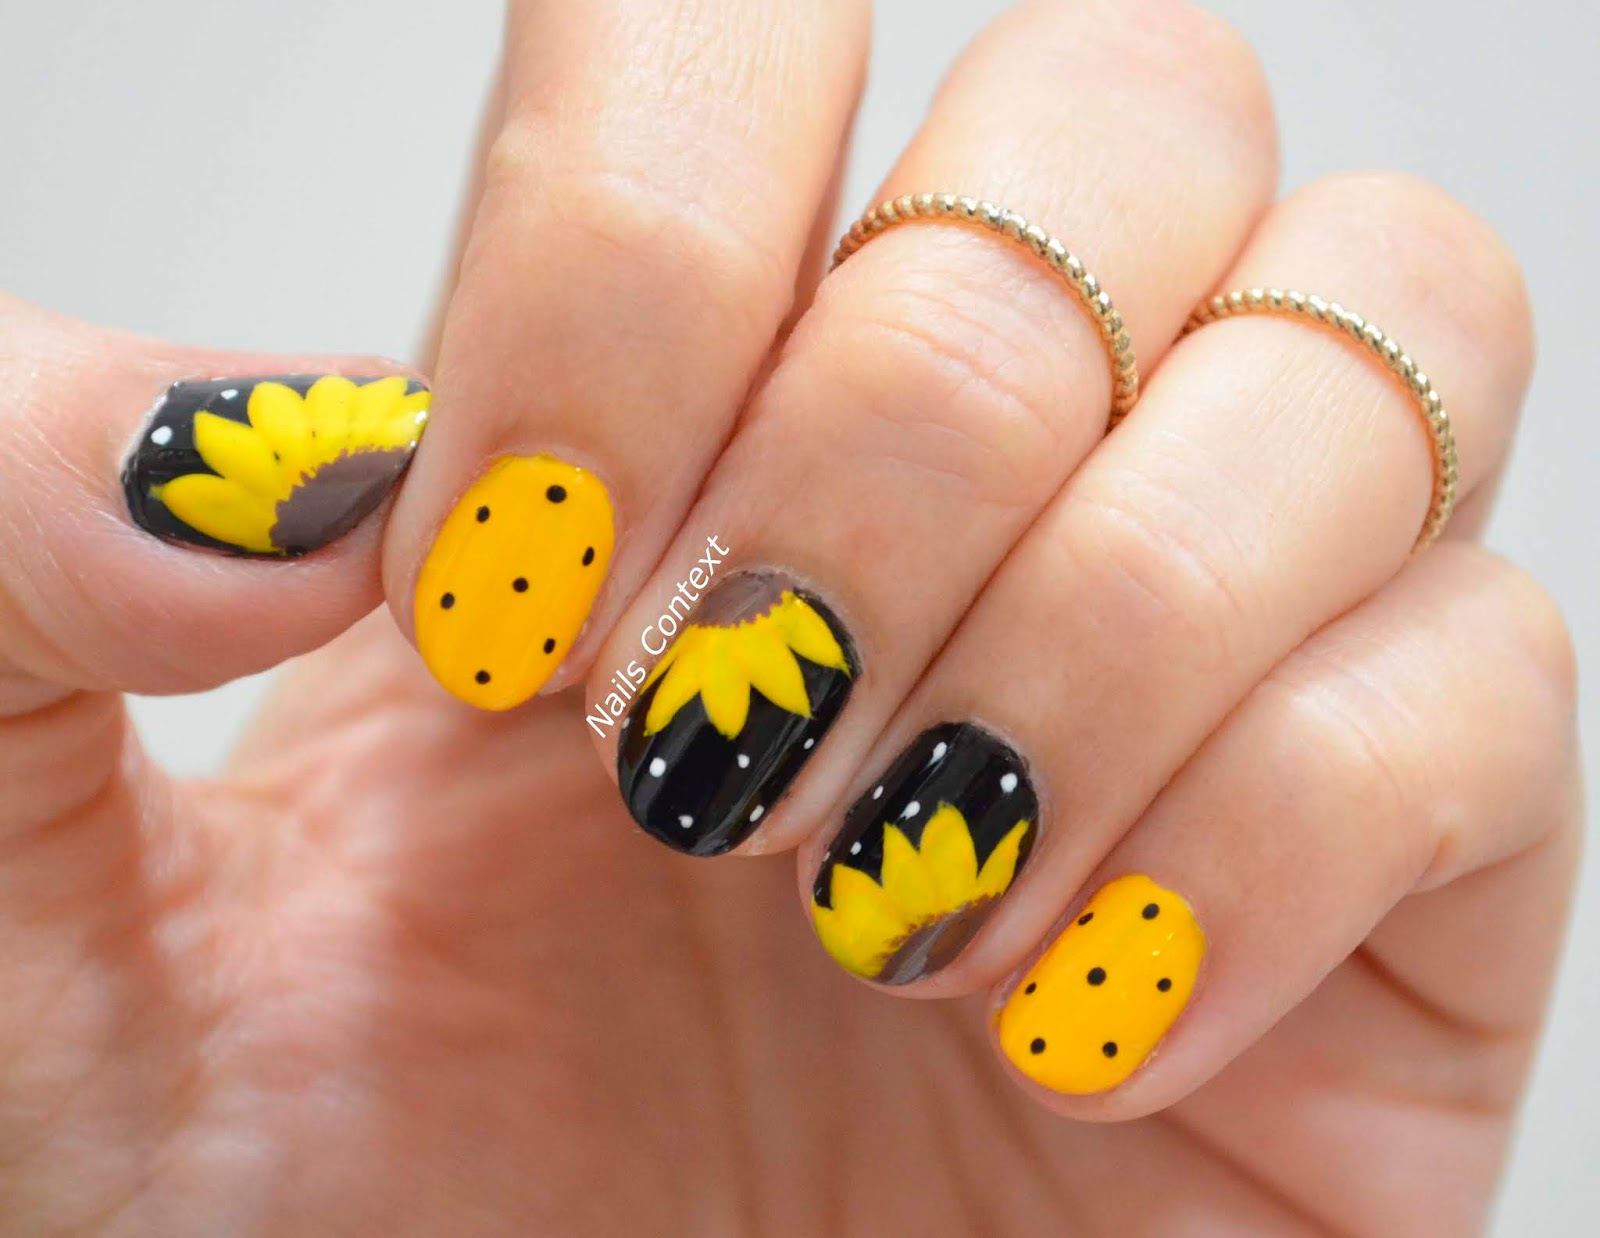 4. Sunflower Nail Art Step by Step - wide 3